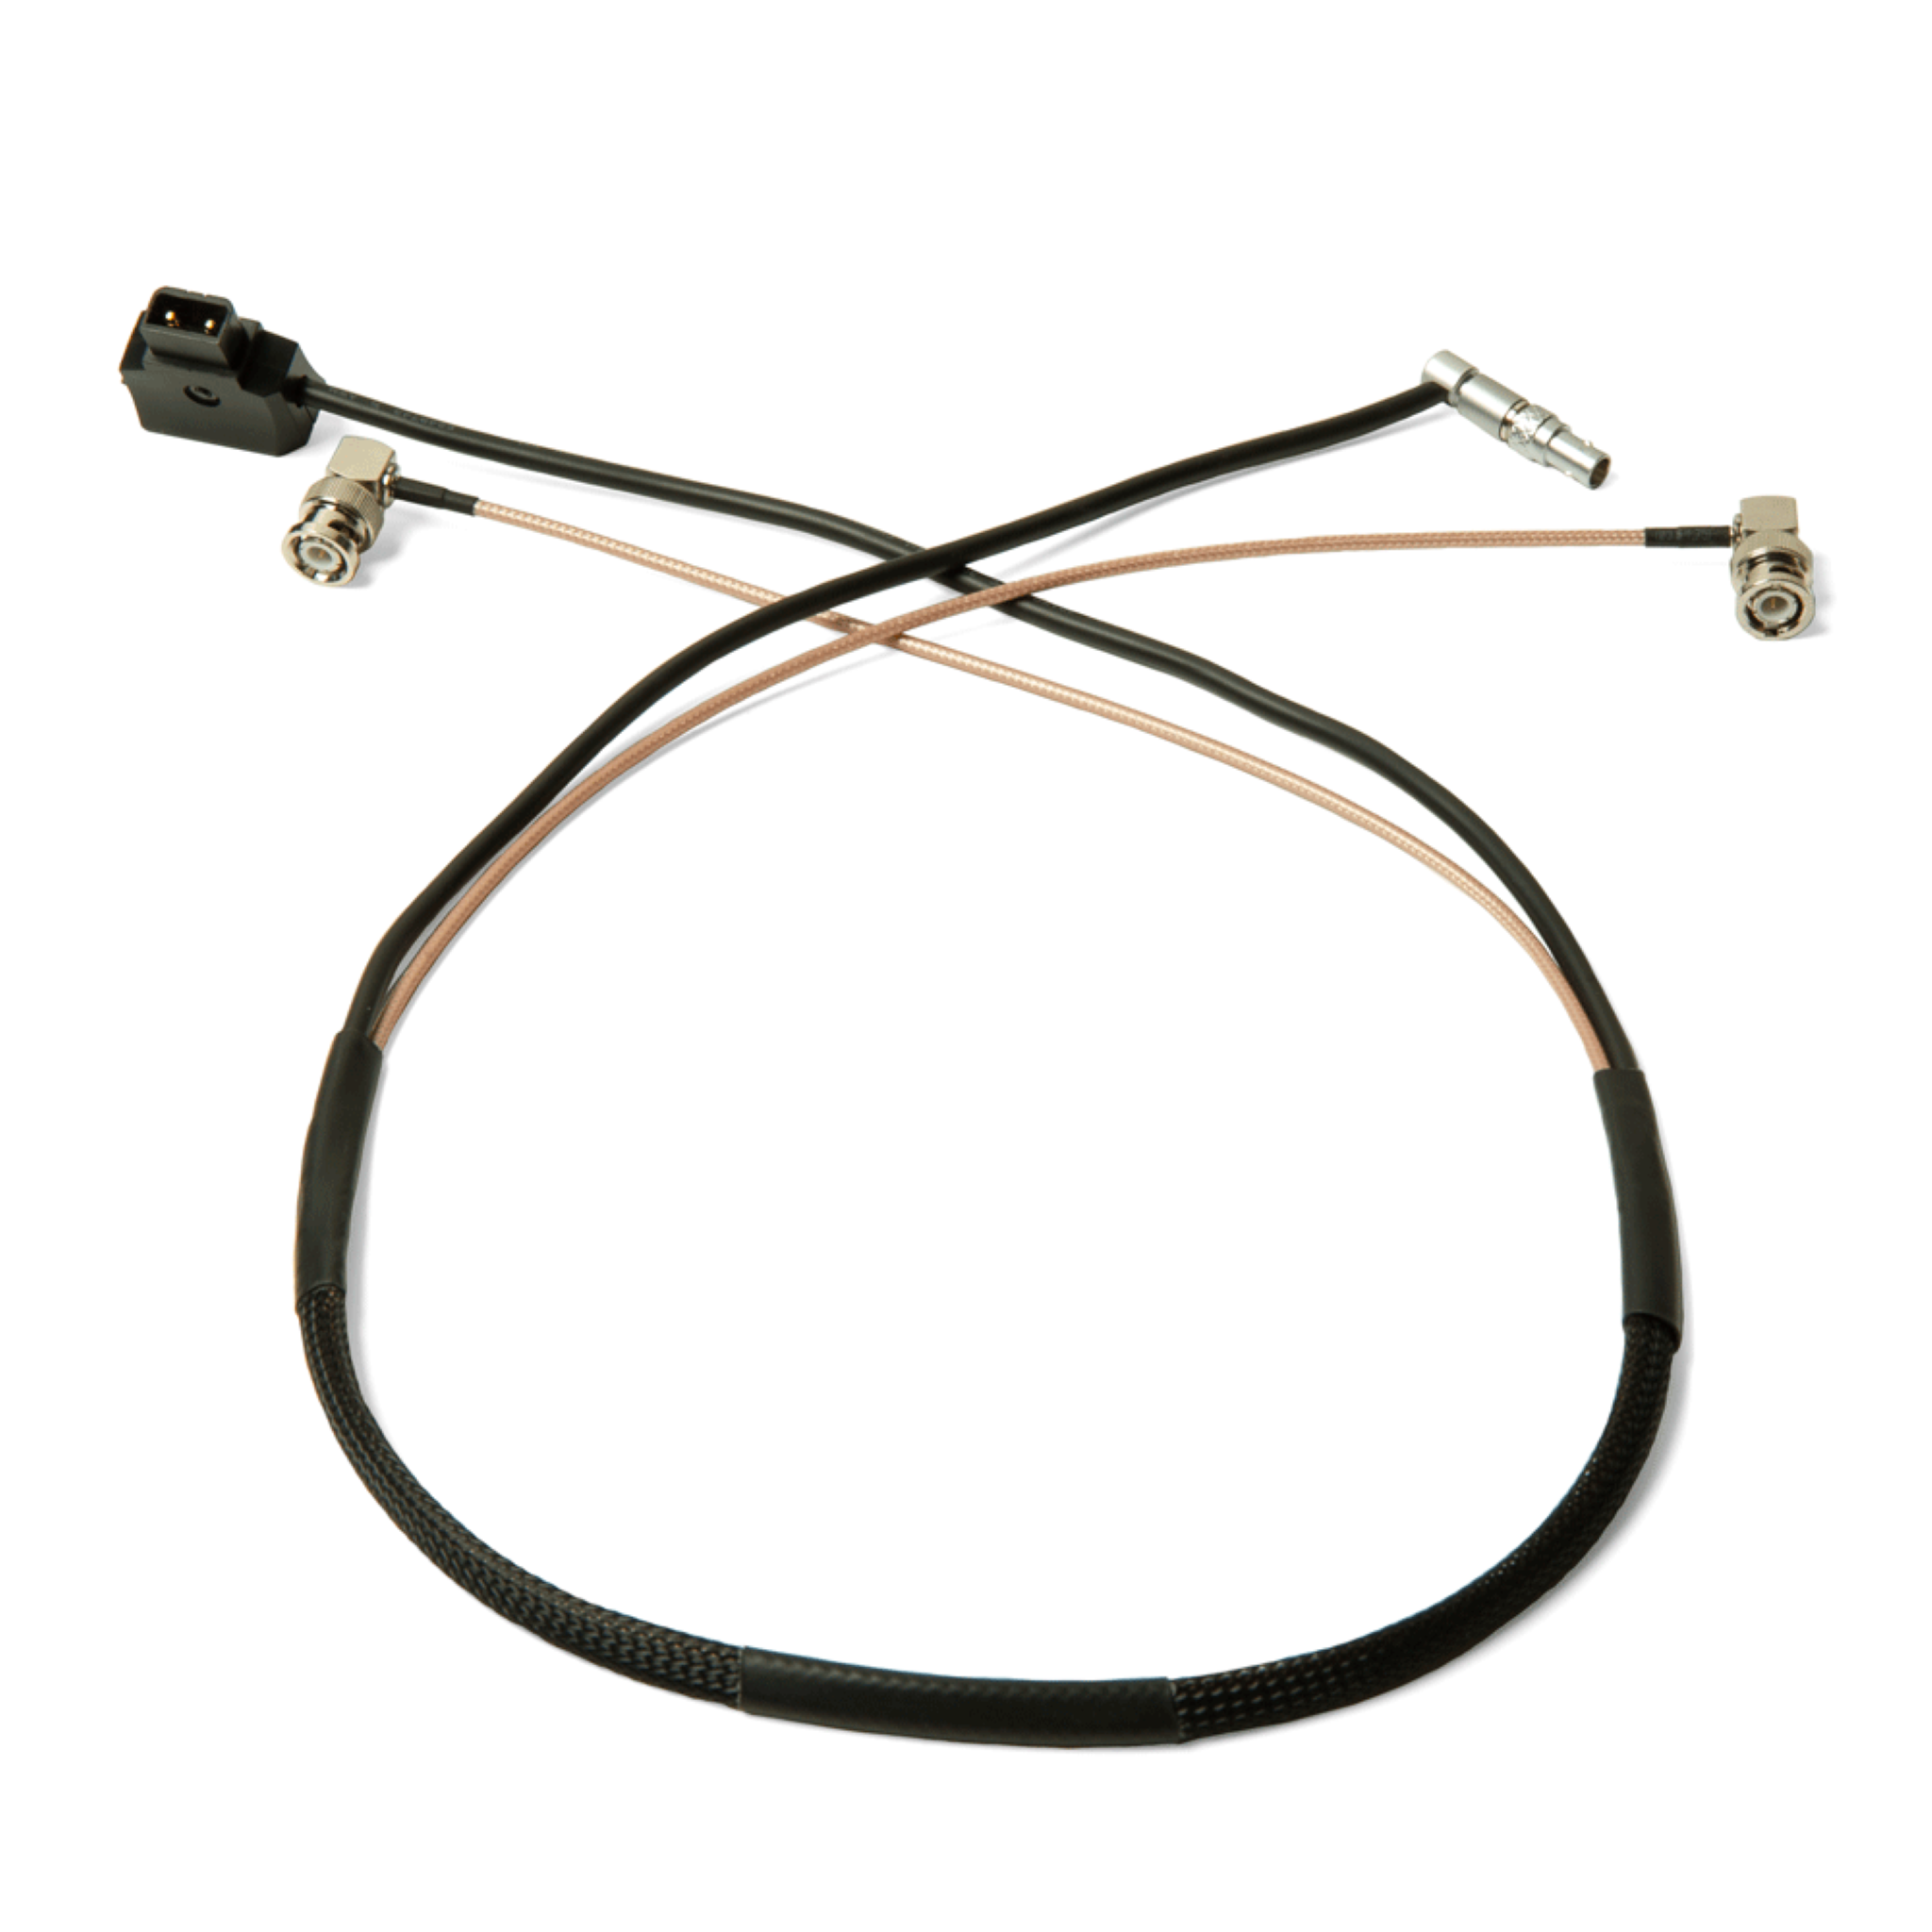 4 Pin Lemo Compatible Power & SDI Video Cable with Power Switch